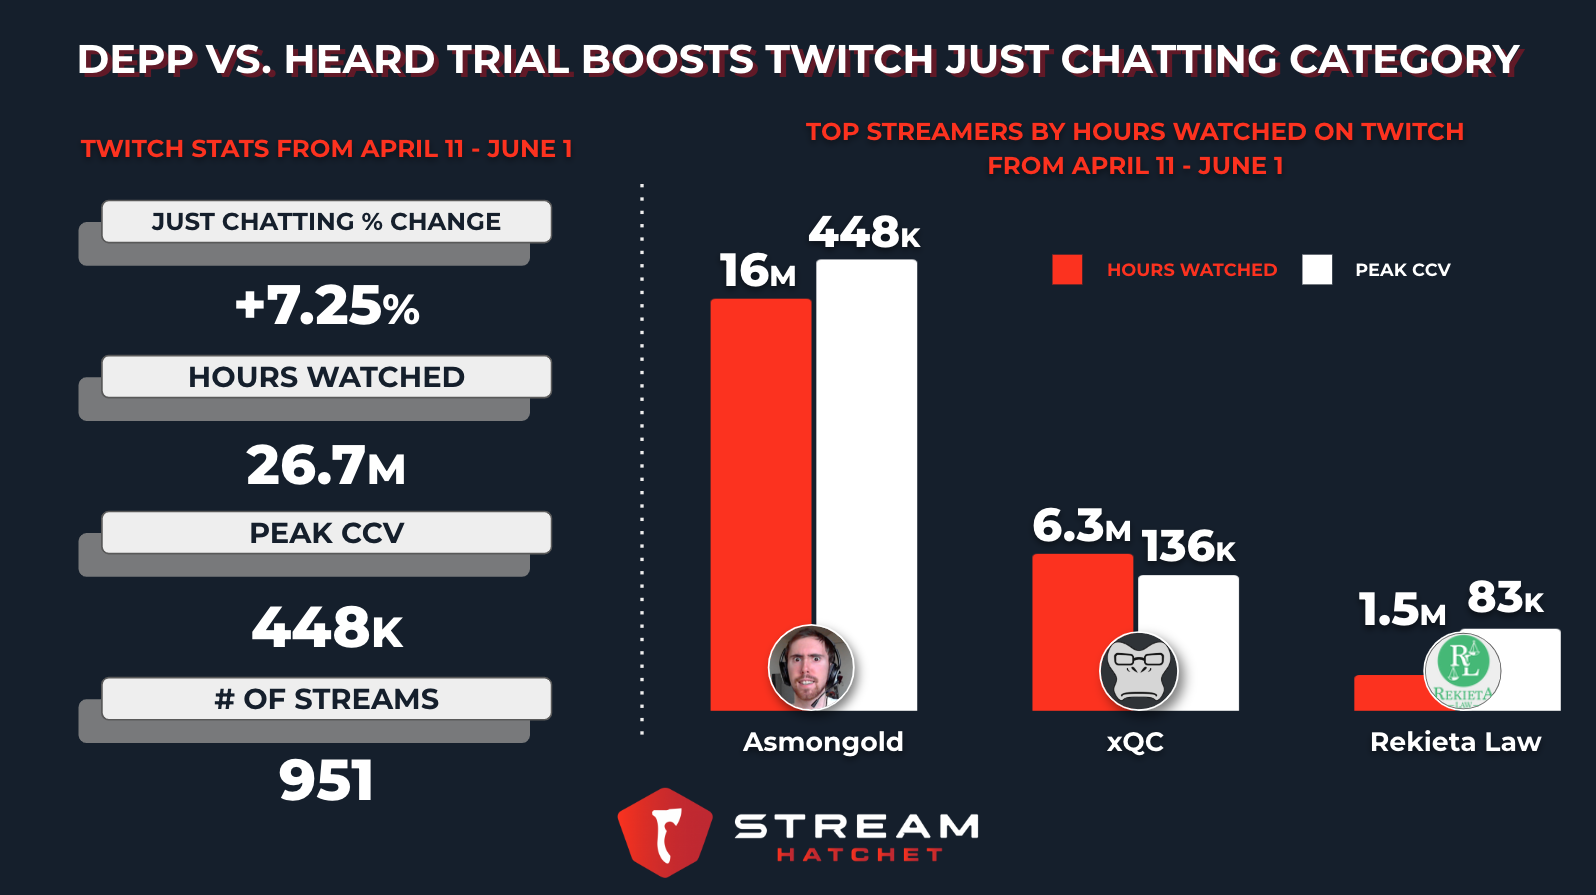 The Explosive Growth of Just Chatting, by Stream Hatchet